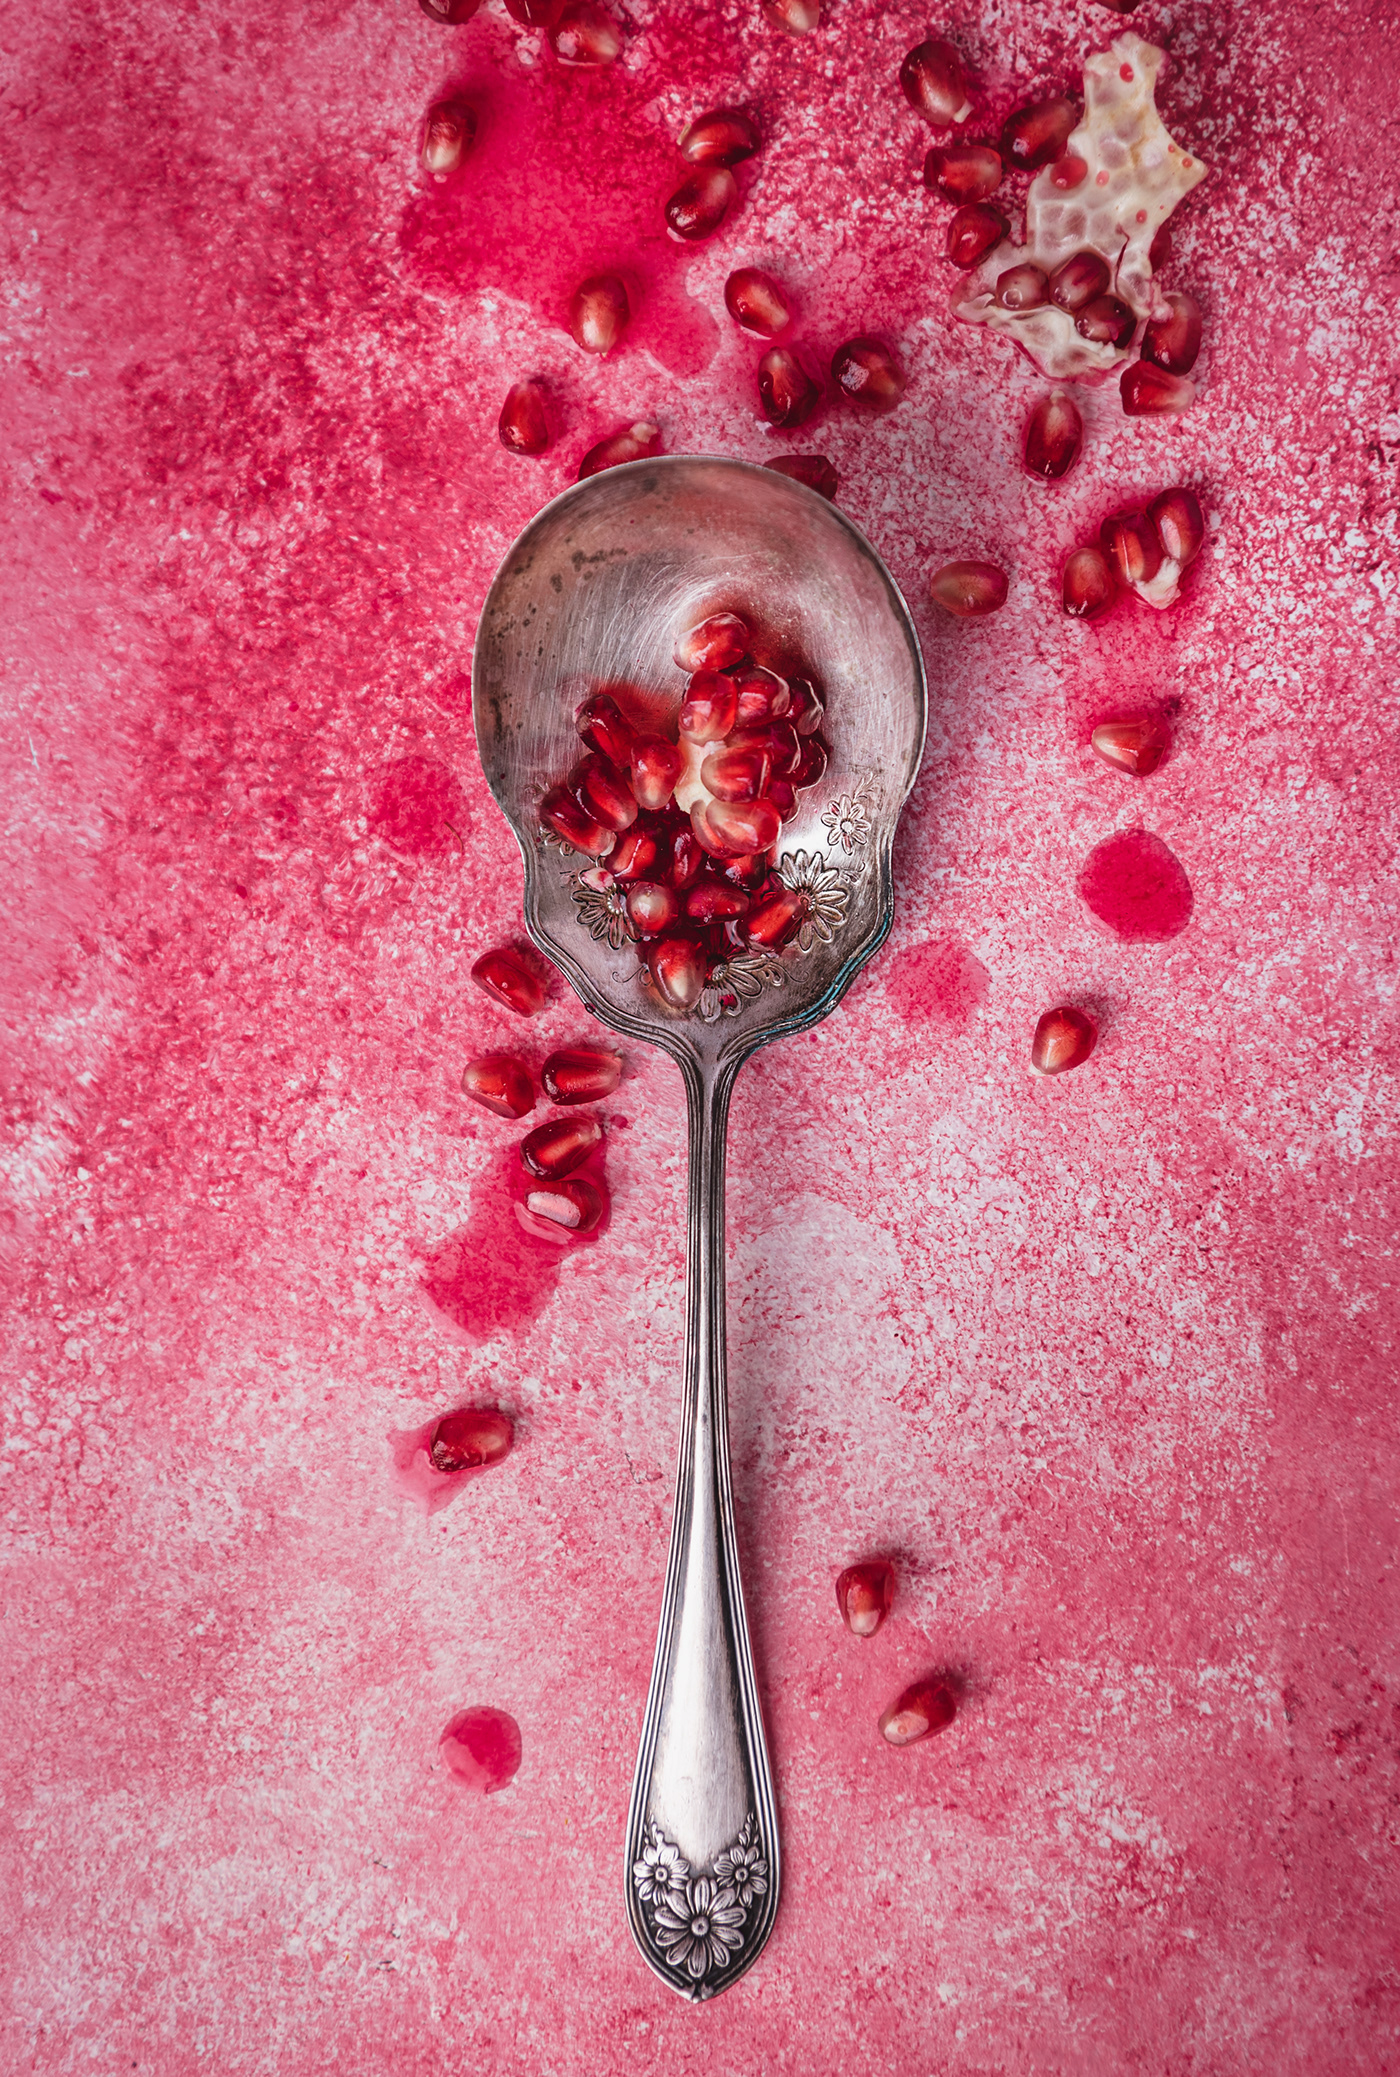 backdrop foodcolors foodphotography foodphotos foodstyling lightroom pomegranate